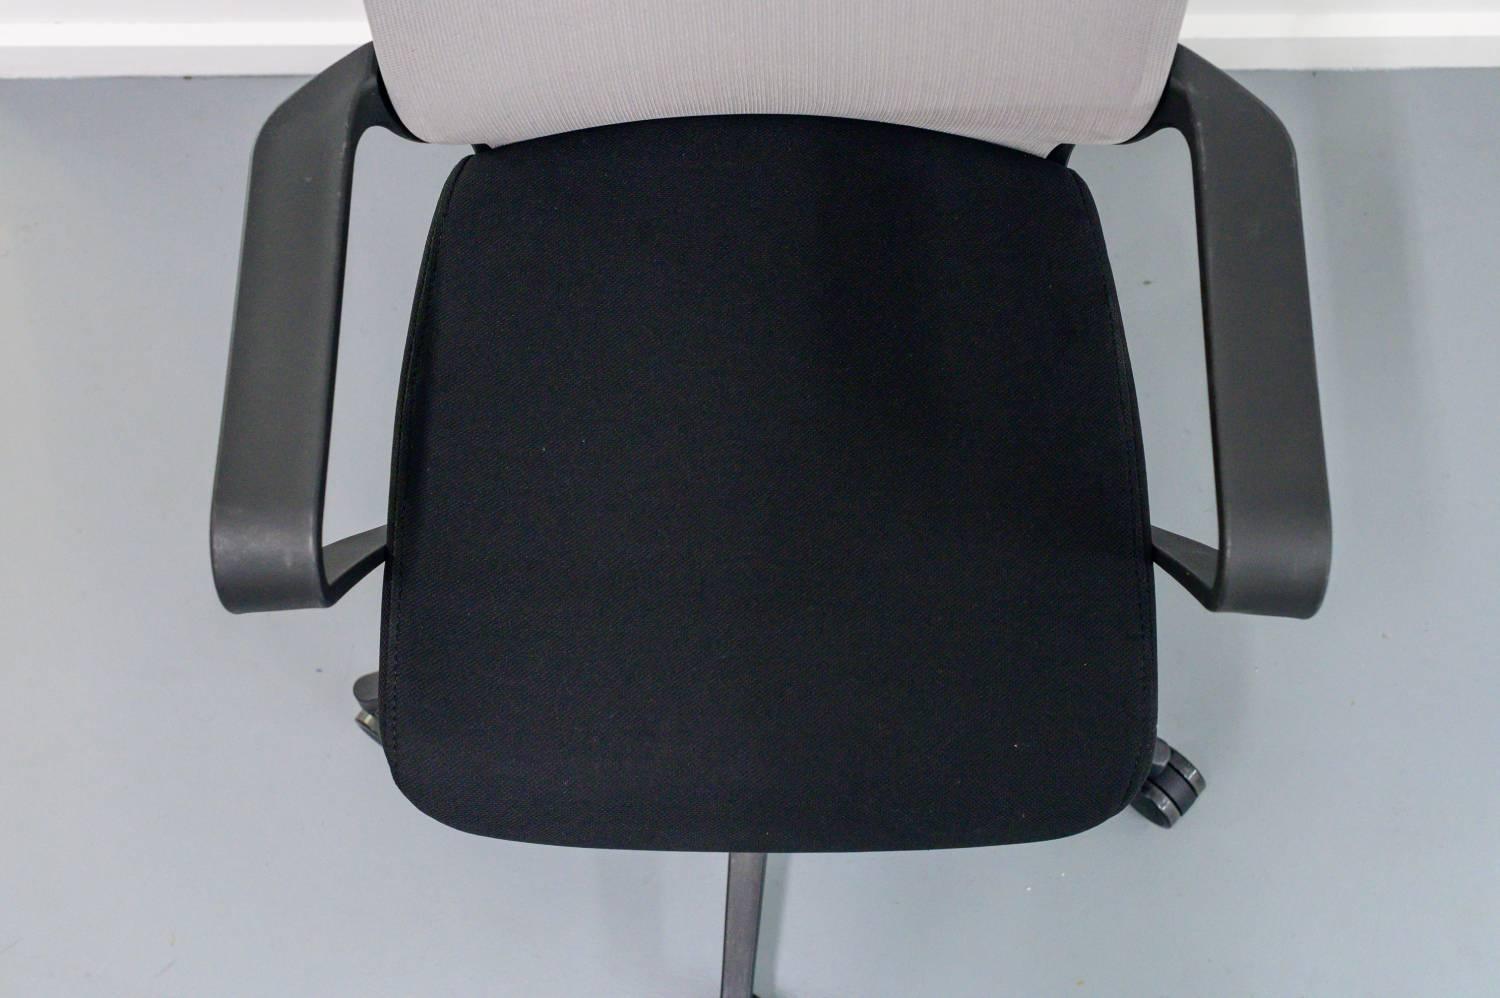 Argo Executive Office Chair with Headrest - Black - Furniture Castle